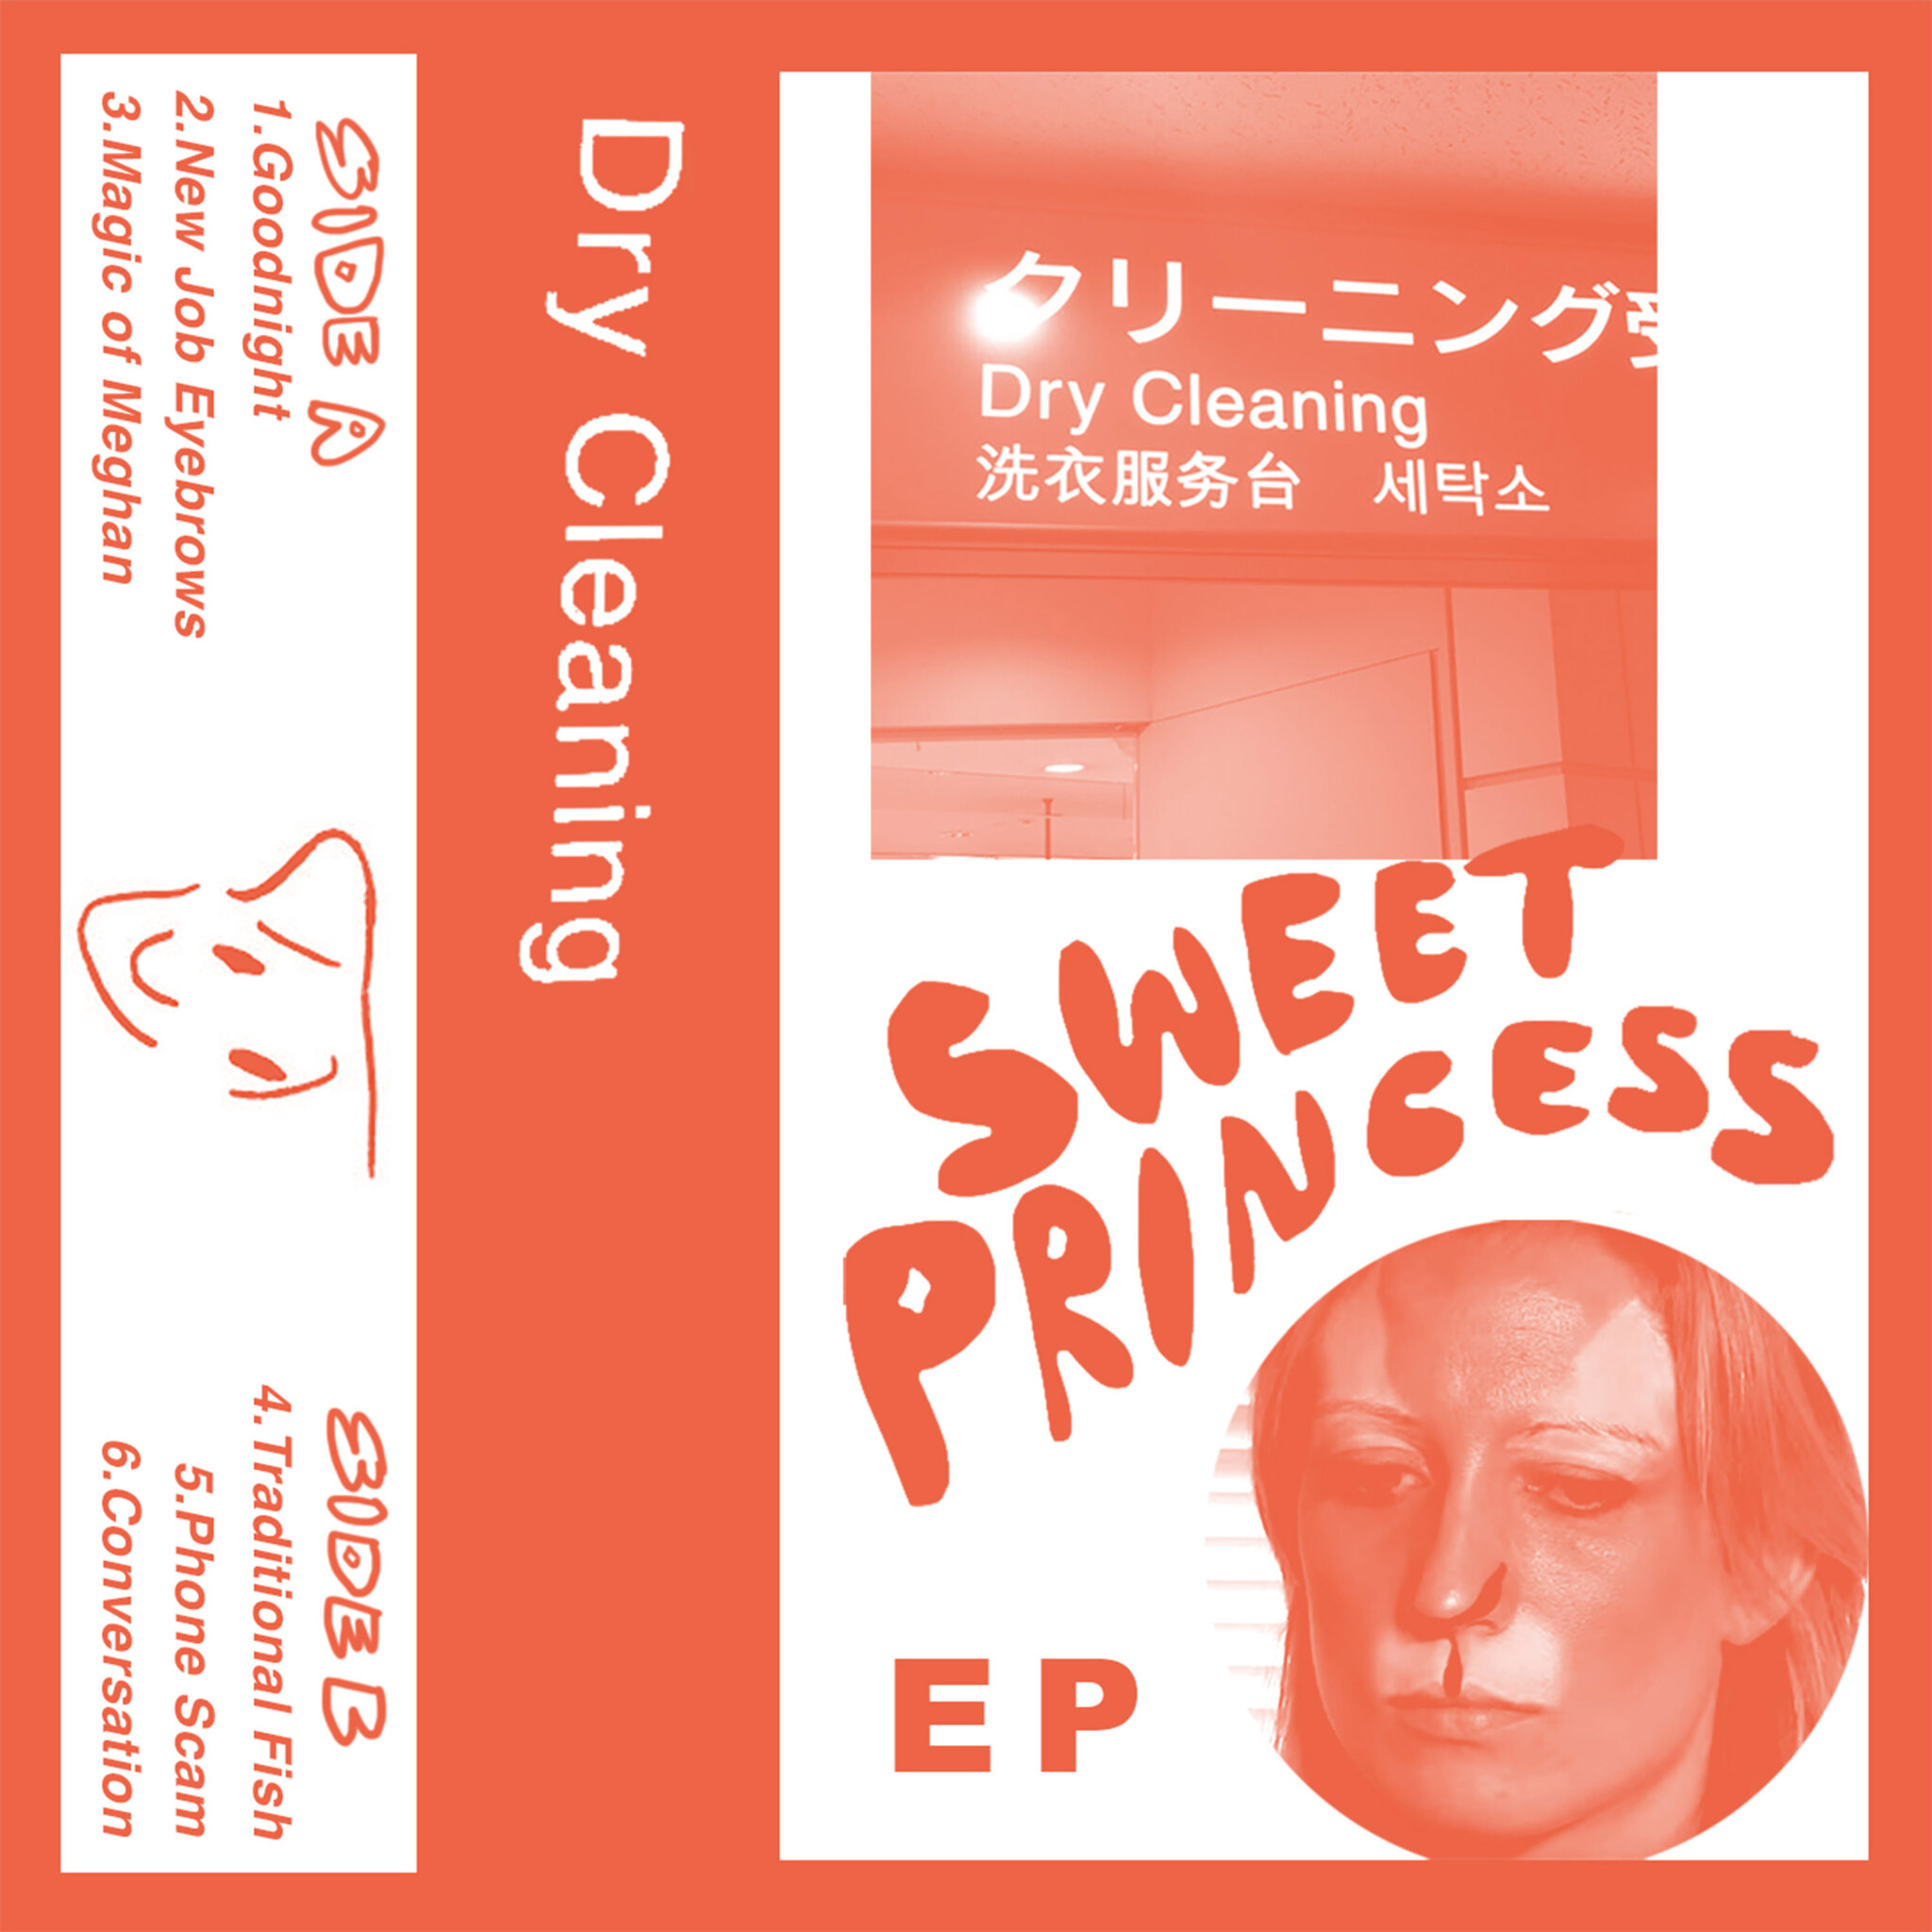 Dry Cleaning "Boundary Road Snacks and Drinks + Sweet Princess" Transparent Blue 🔵 LP